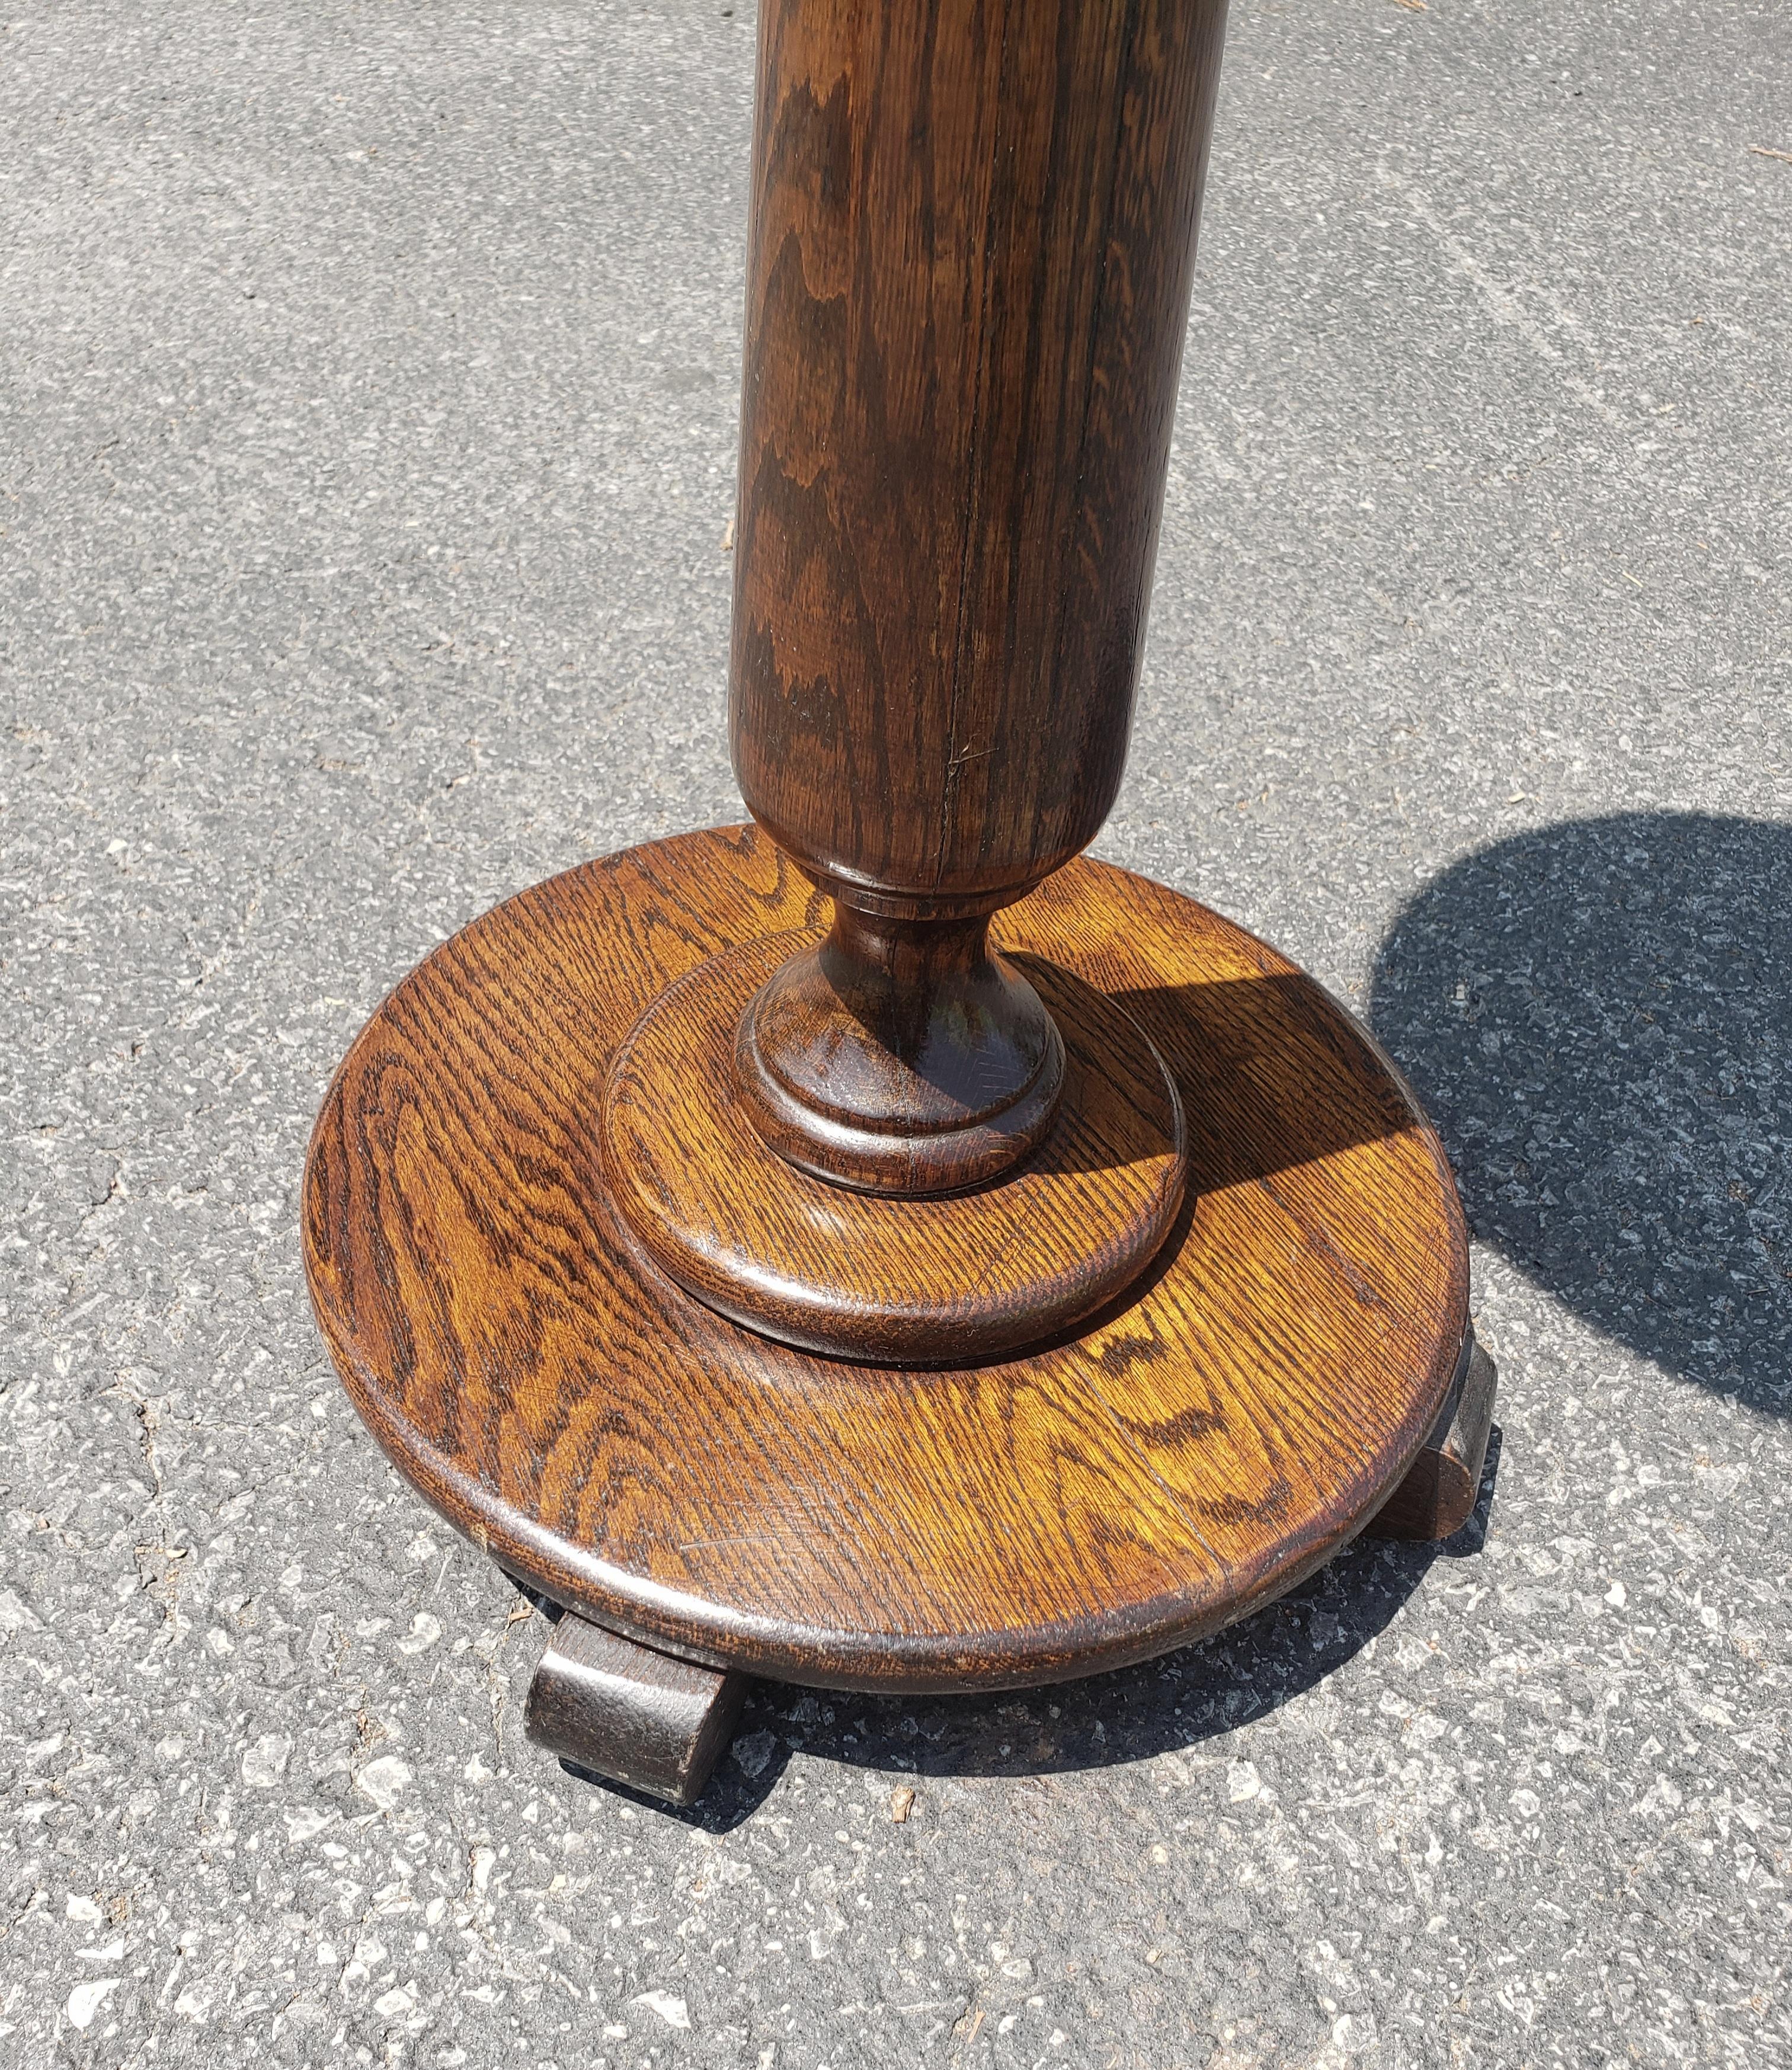 Midcentury American Classical Solid red Oak Pedestal or Plant Stand in very good vintage condition. Measures 12